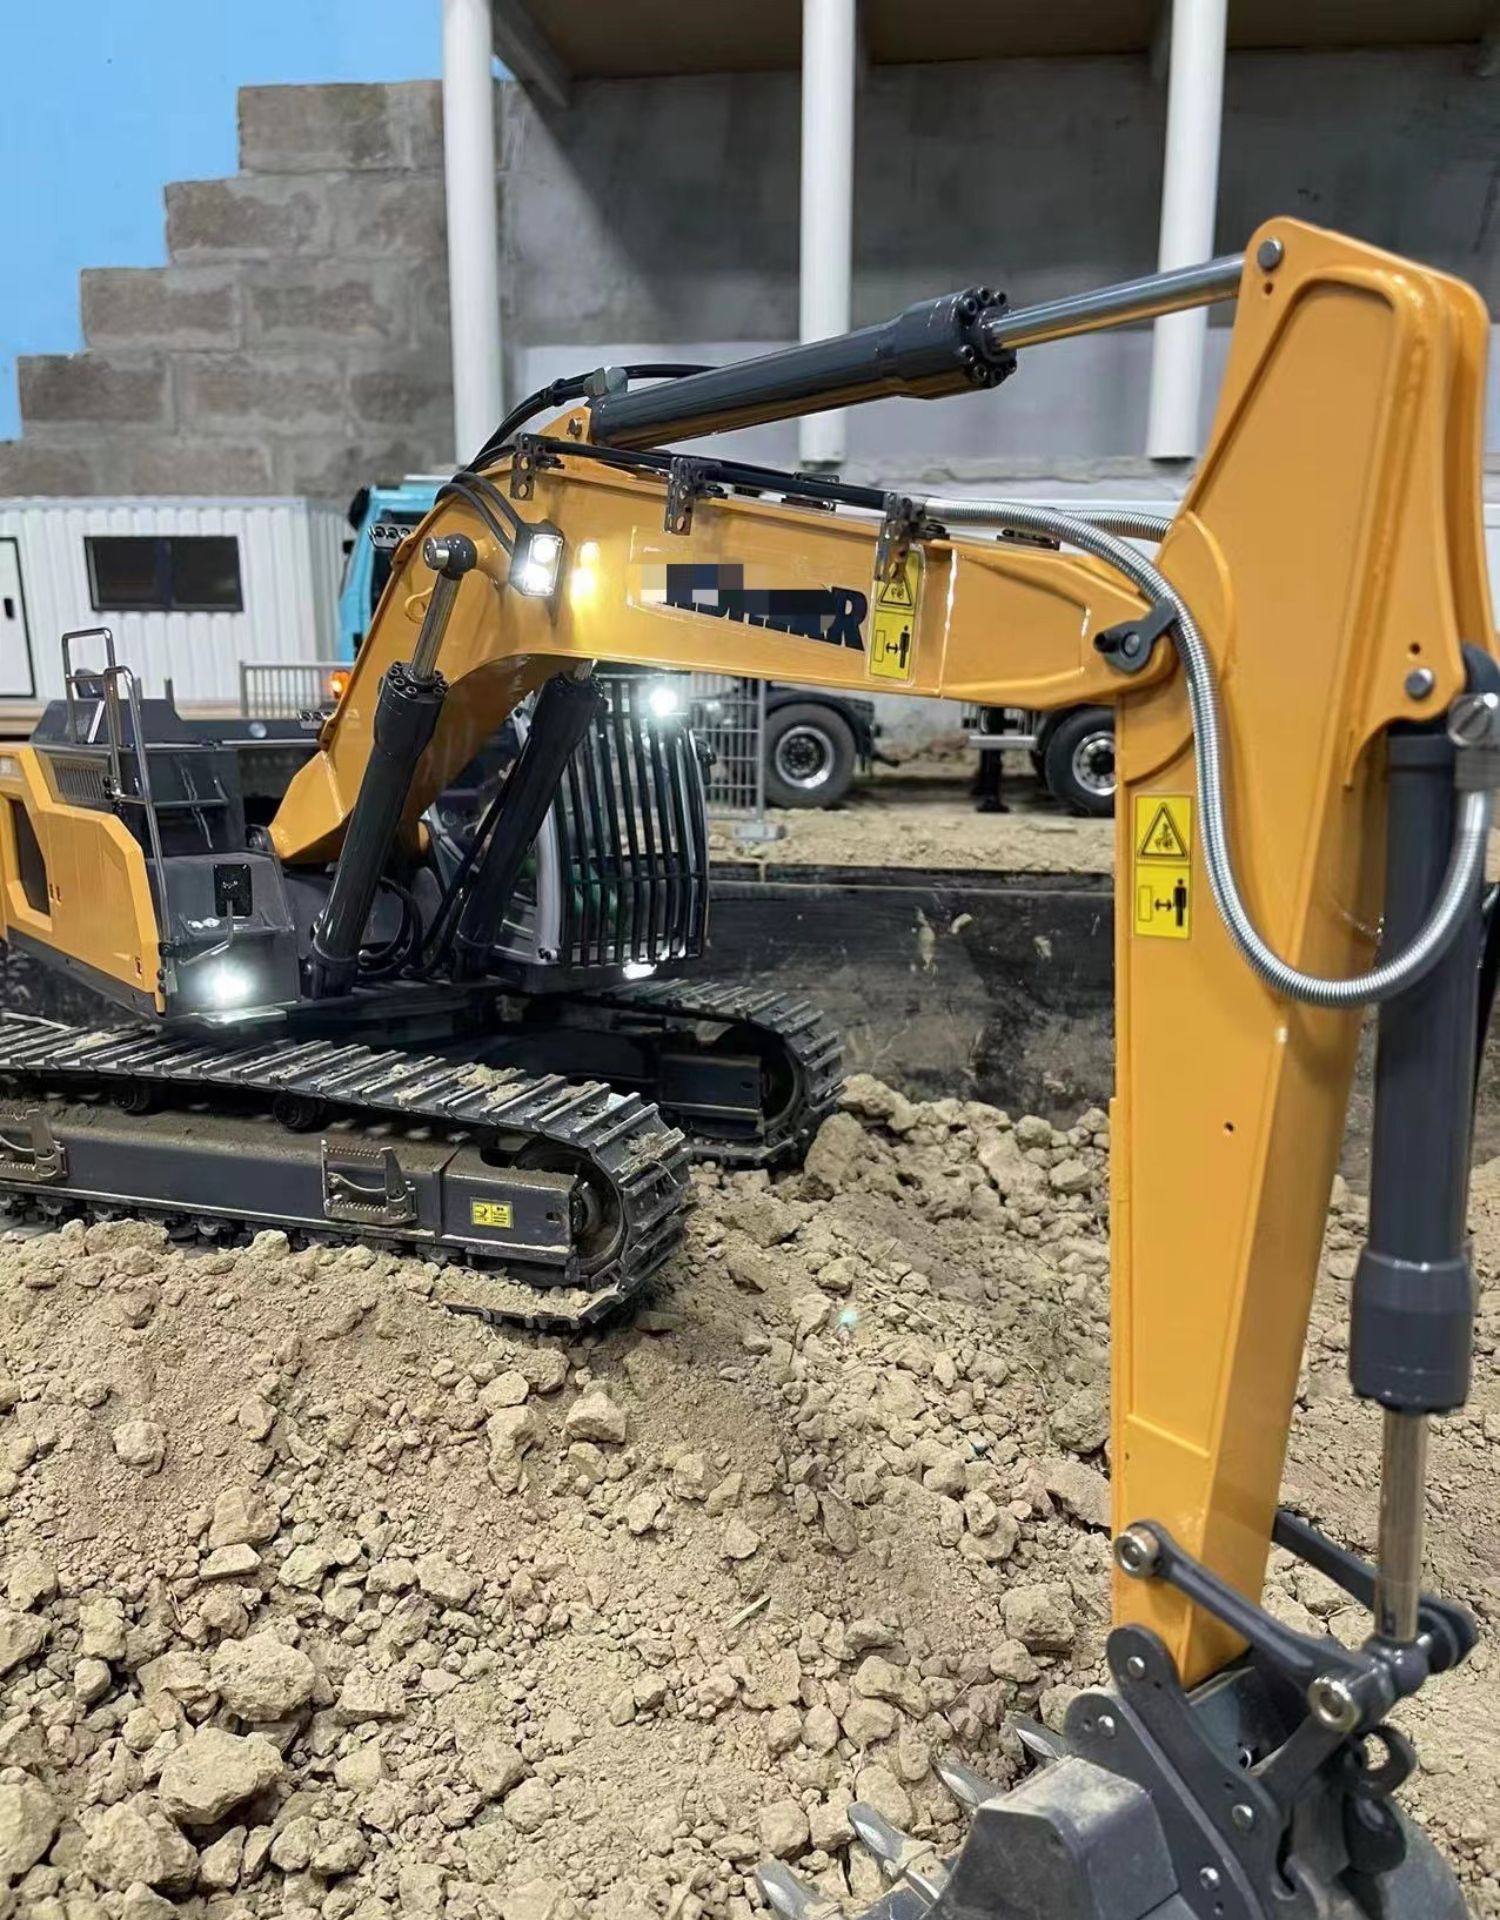 R 945 Hydraulic RC Excavator, Full Weight 25KG! 99% Replica Scale Model Excavator, Looks and Runs More Like a Real Excavator